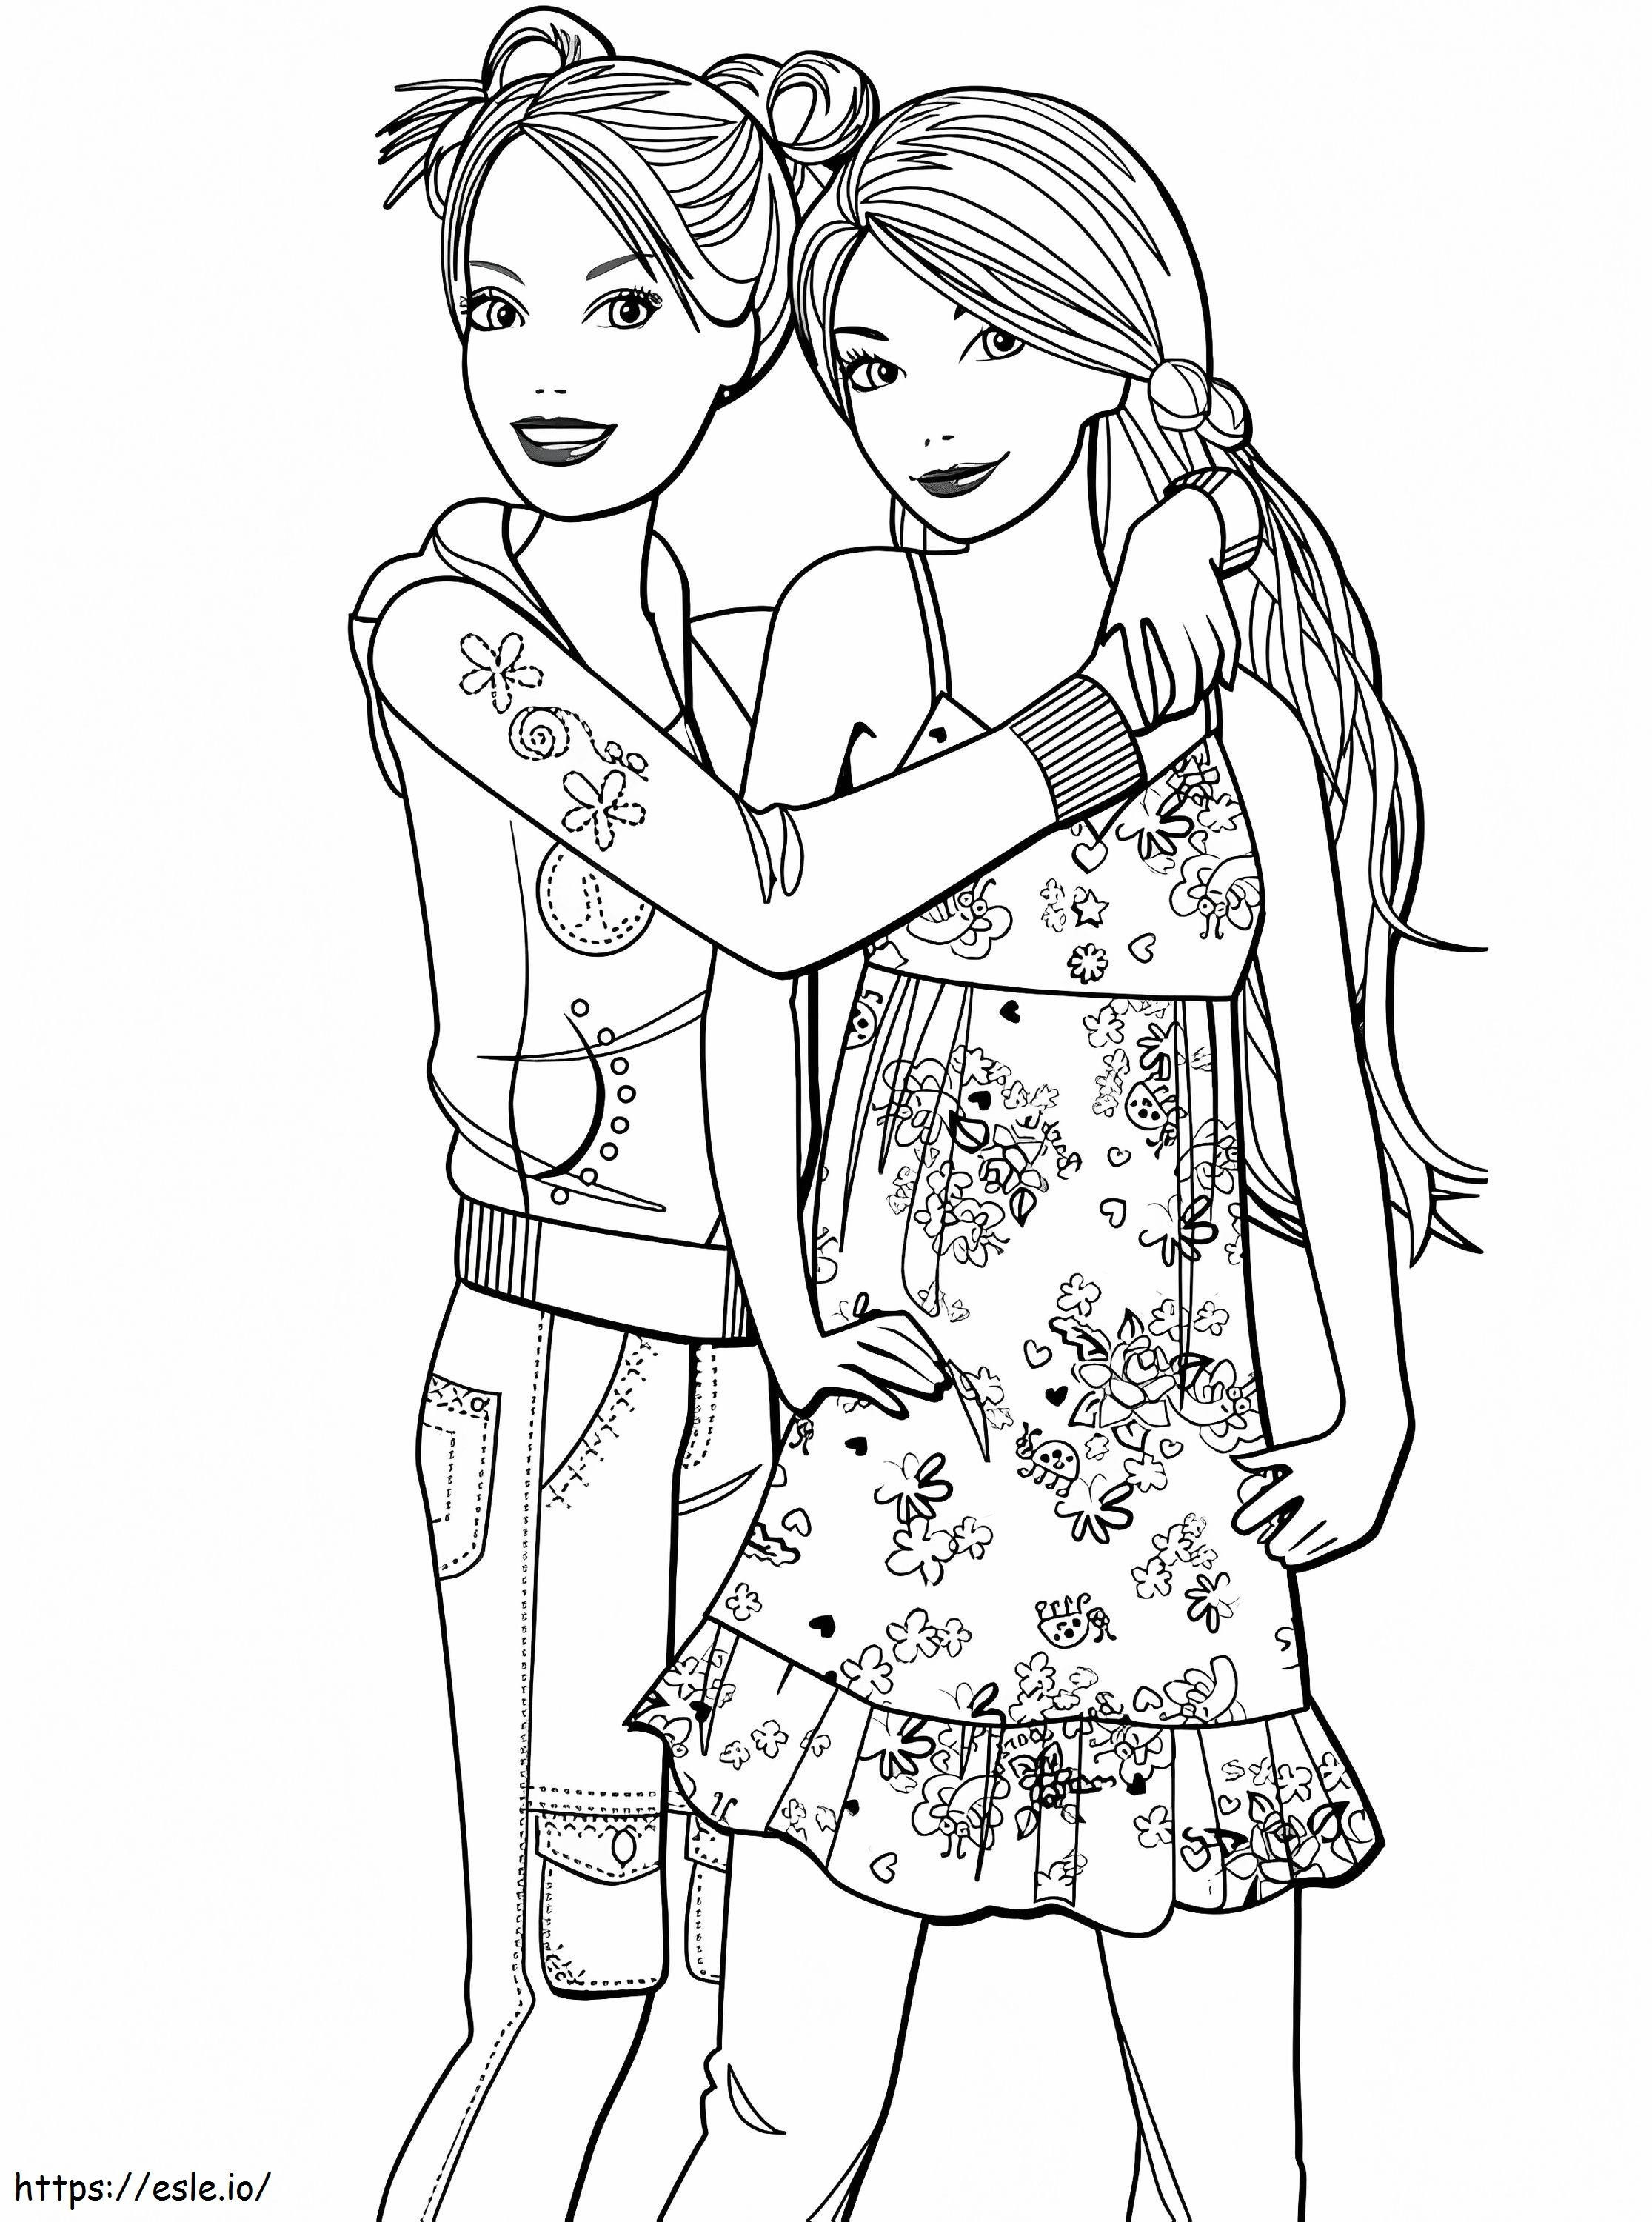 Best Friends 2 coloring page